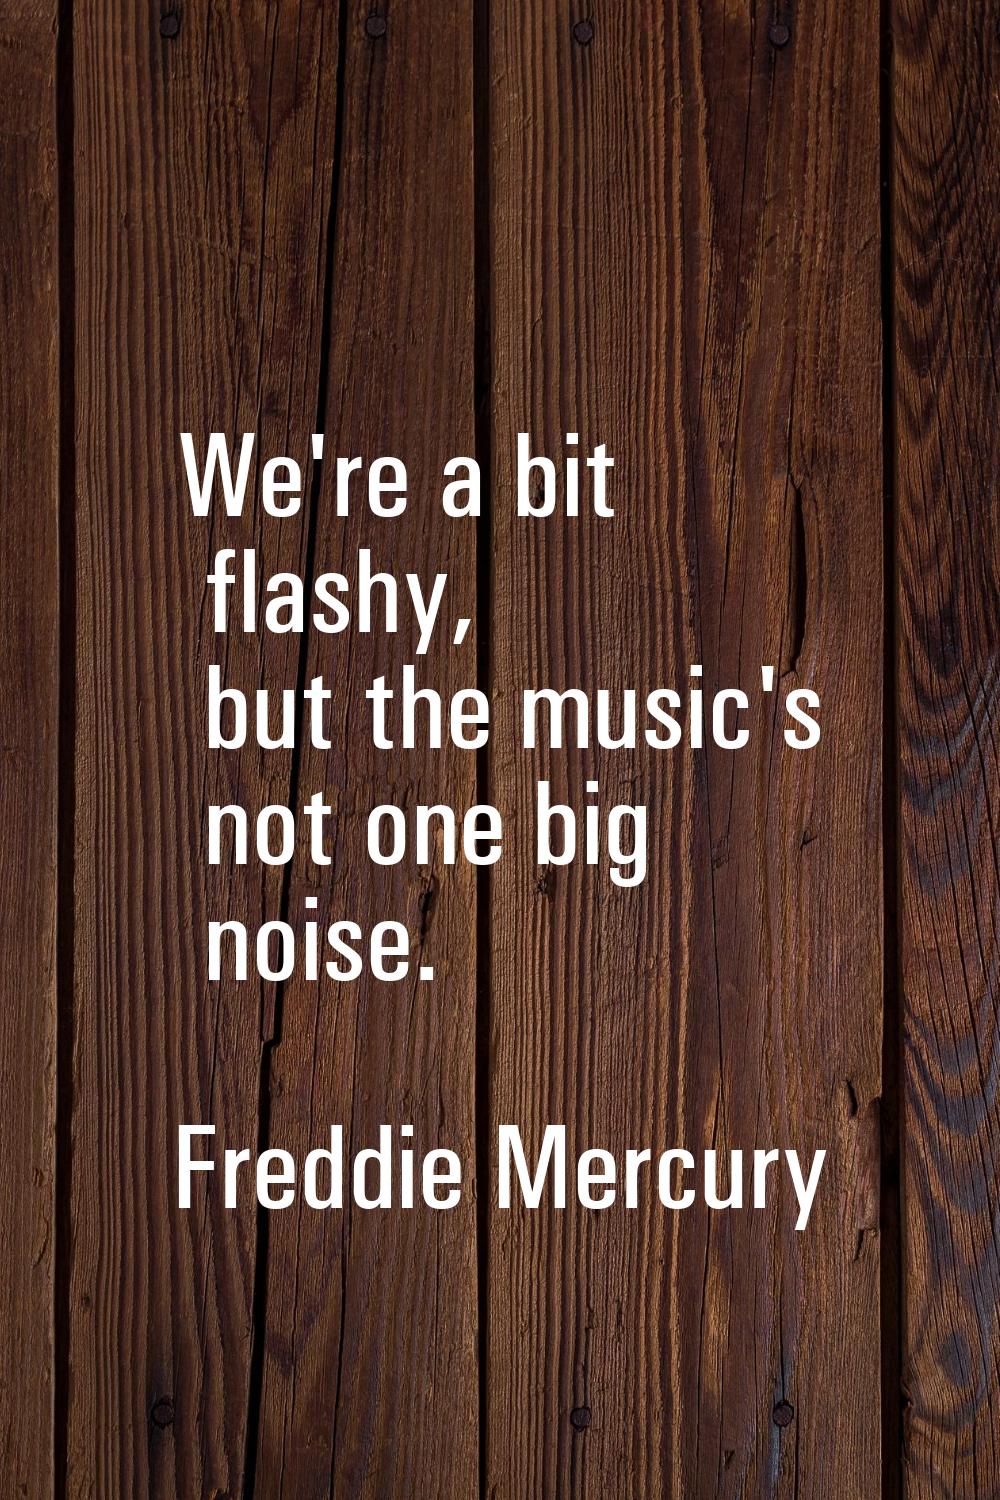 We're a bit flashy, but the music's not one big noise.